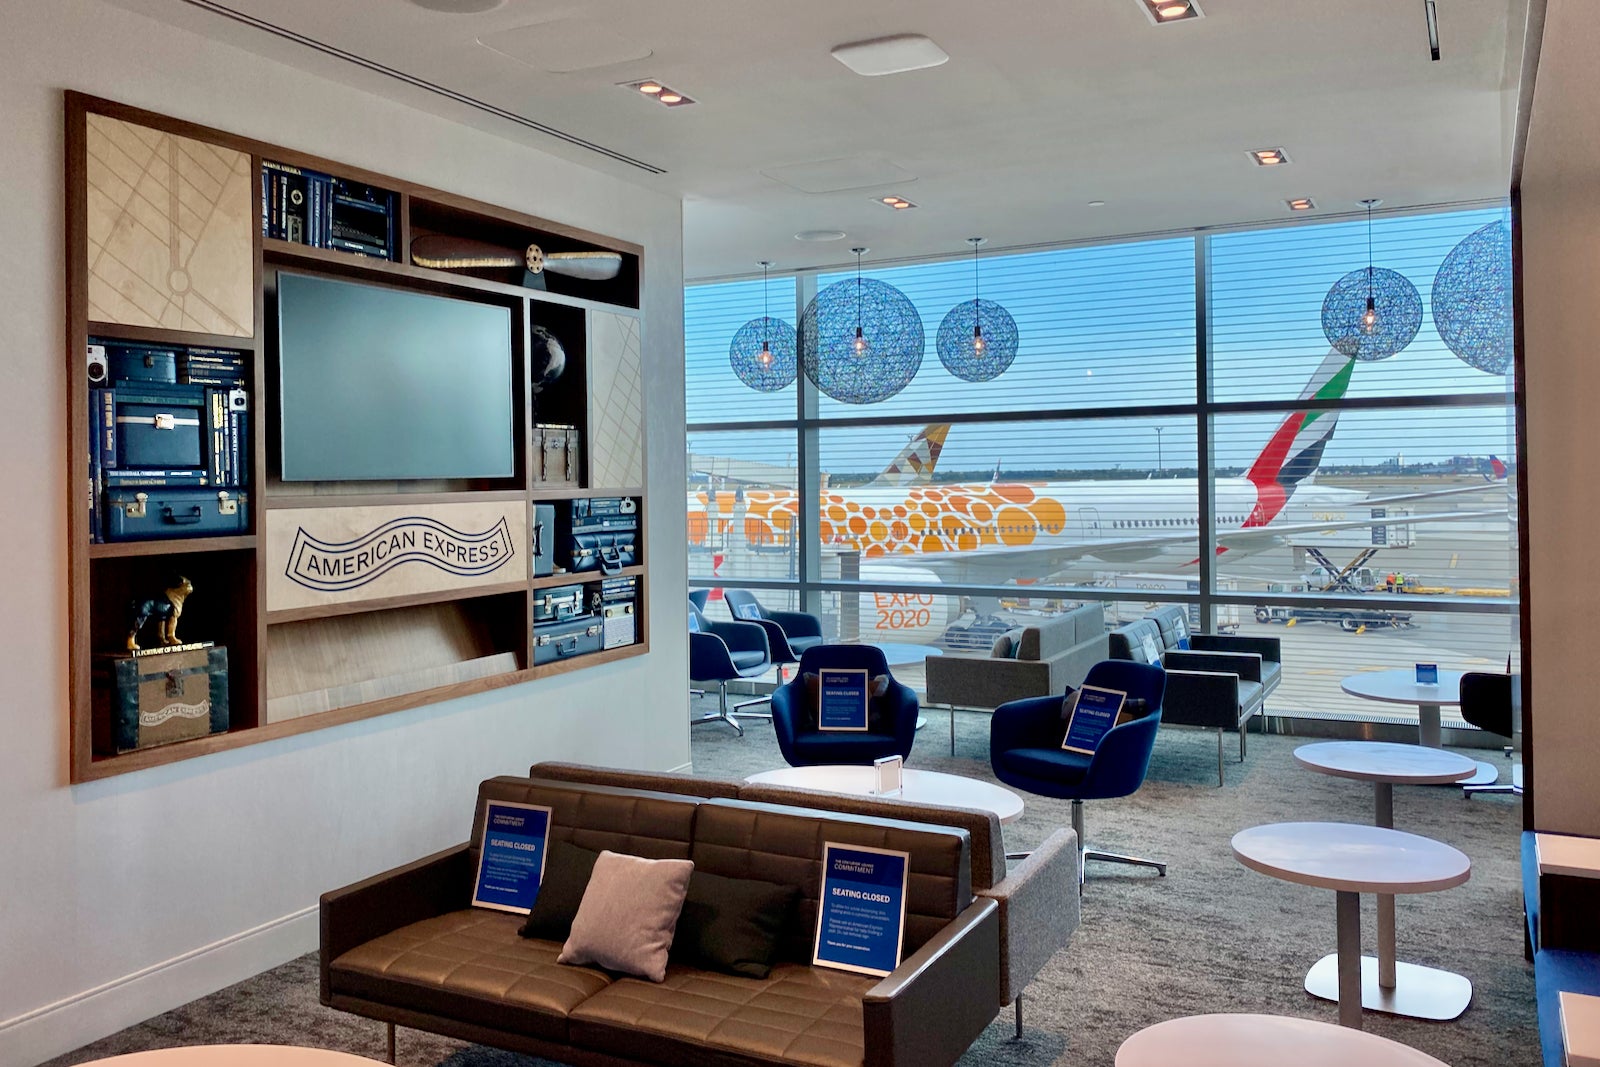 First look: The brand-new Amex Centurion Lounge at JFK - The Points Guy